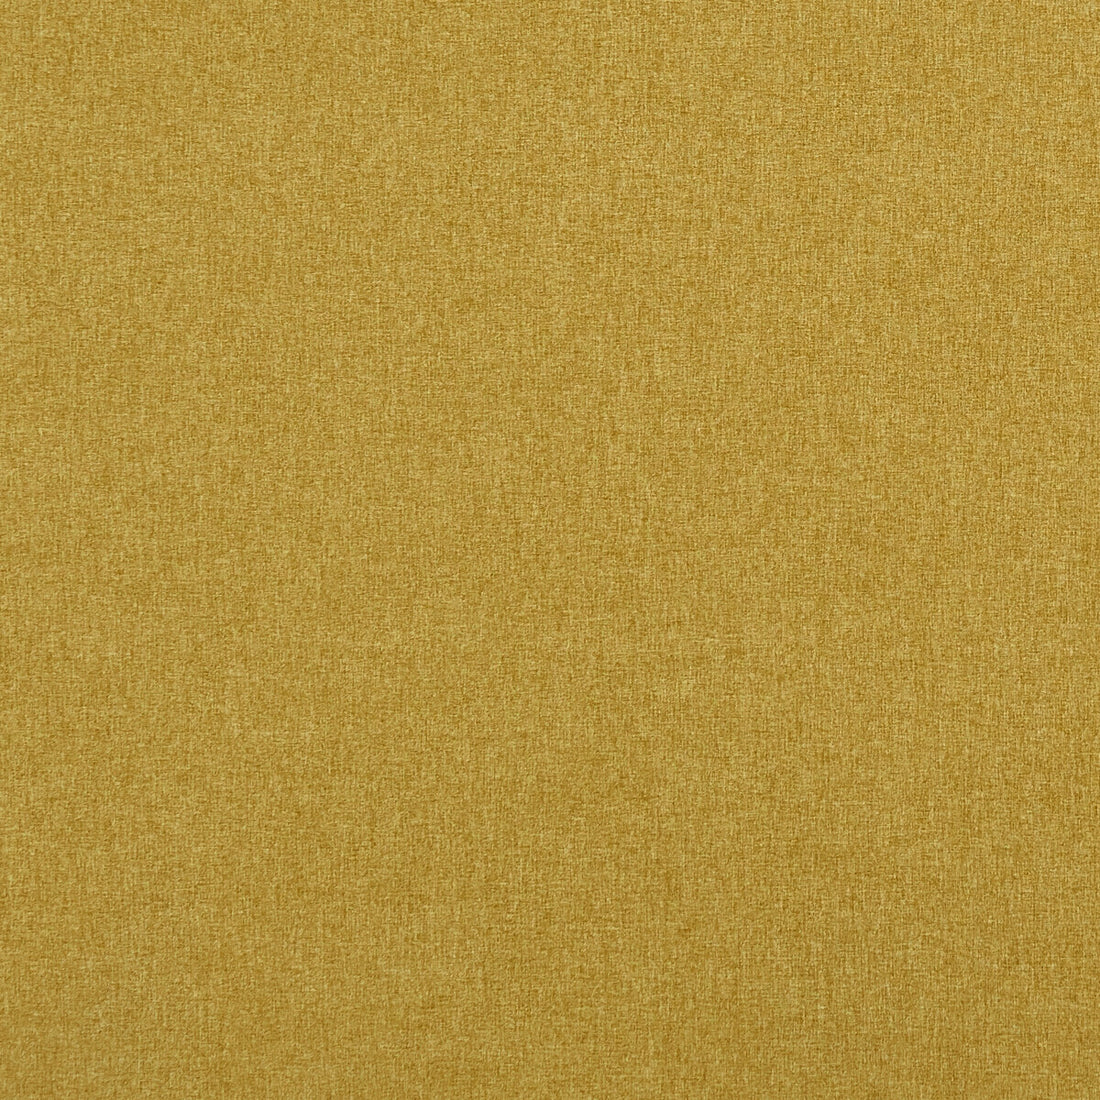 Highlander fabric in gold color - pattern F0848/15.CAC.0 - by Clarke And Clarke in the Clarke &amp; Clarke Highlander collection